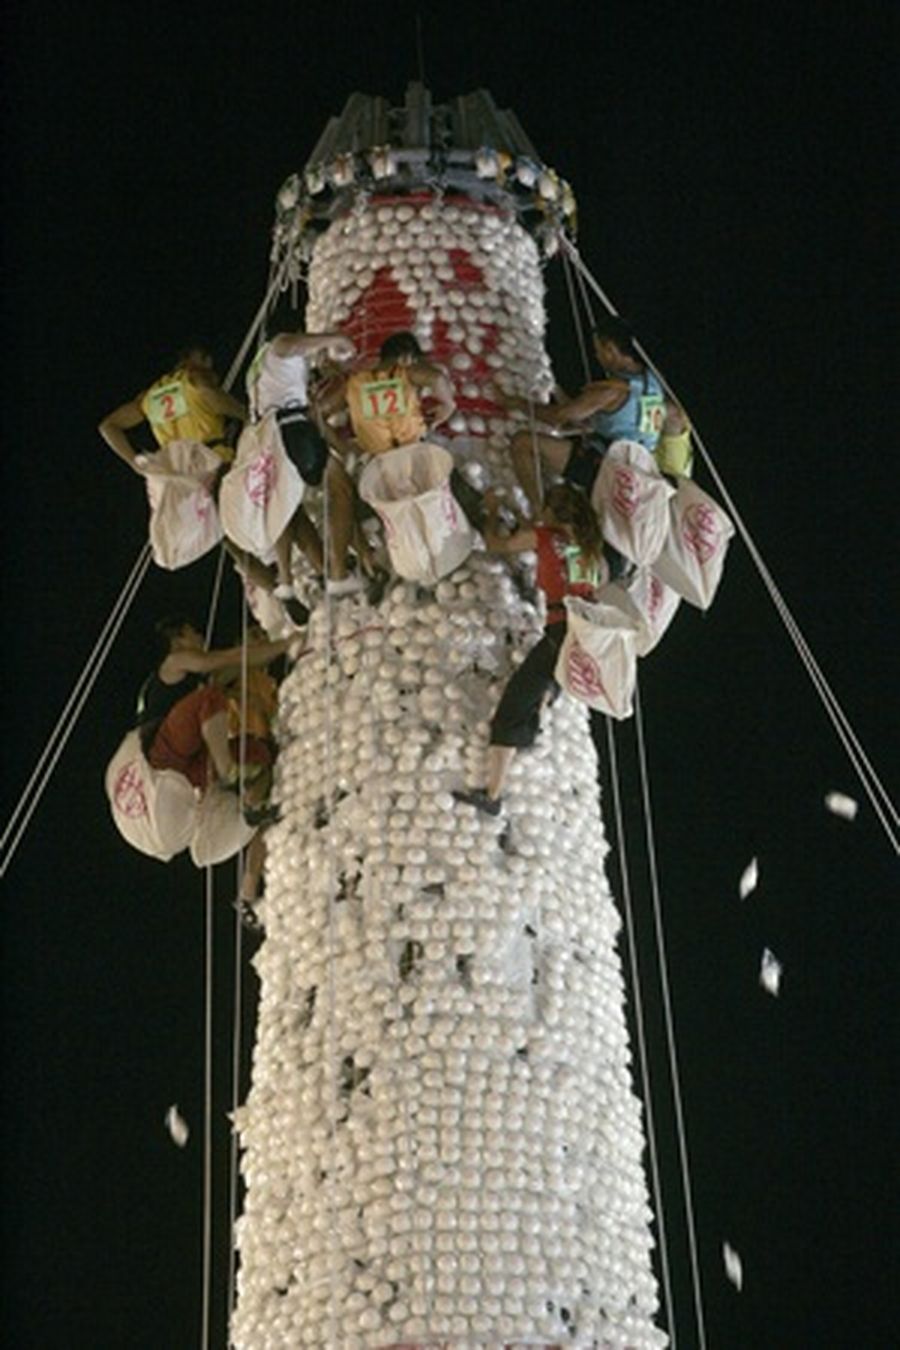 Climbers collect mock buns on a tower during a 'bun-scrambling' event as part of the Bun Festival on the tiny island of Cheung Chau in Hong Kong.